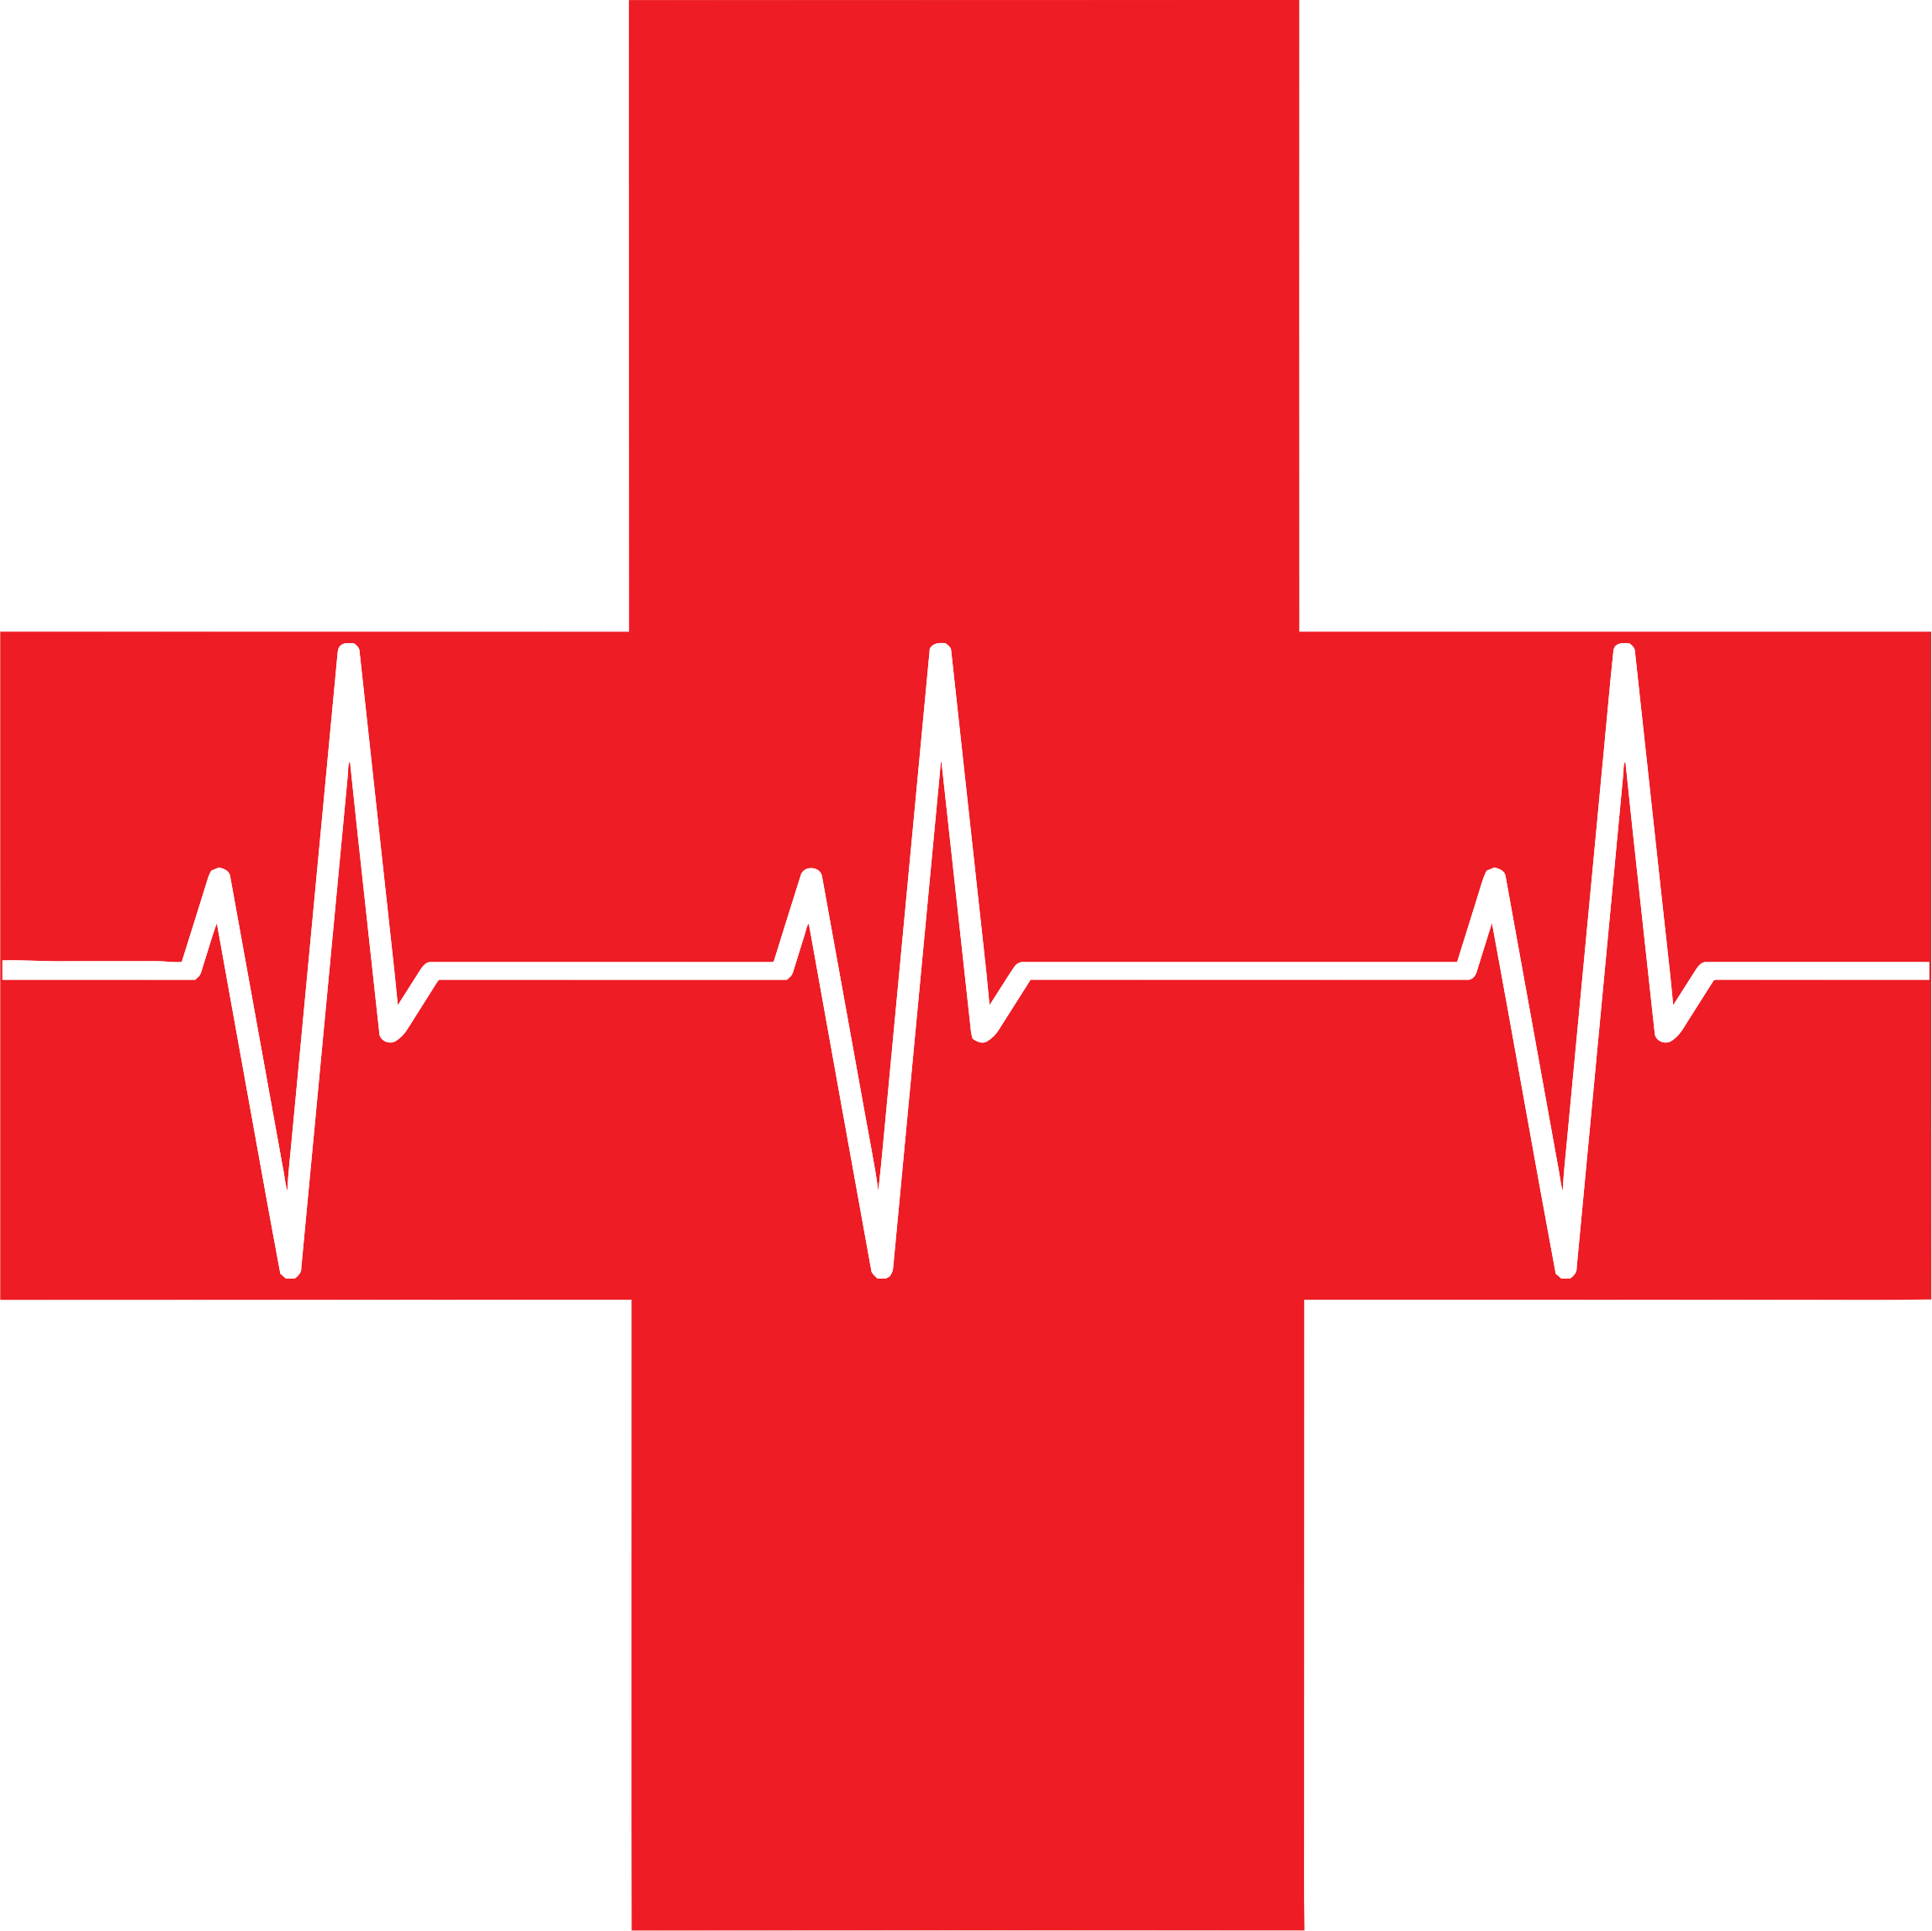 Big Image (Png) - Red Cross, Transparent background PNG HD thumbnail